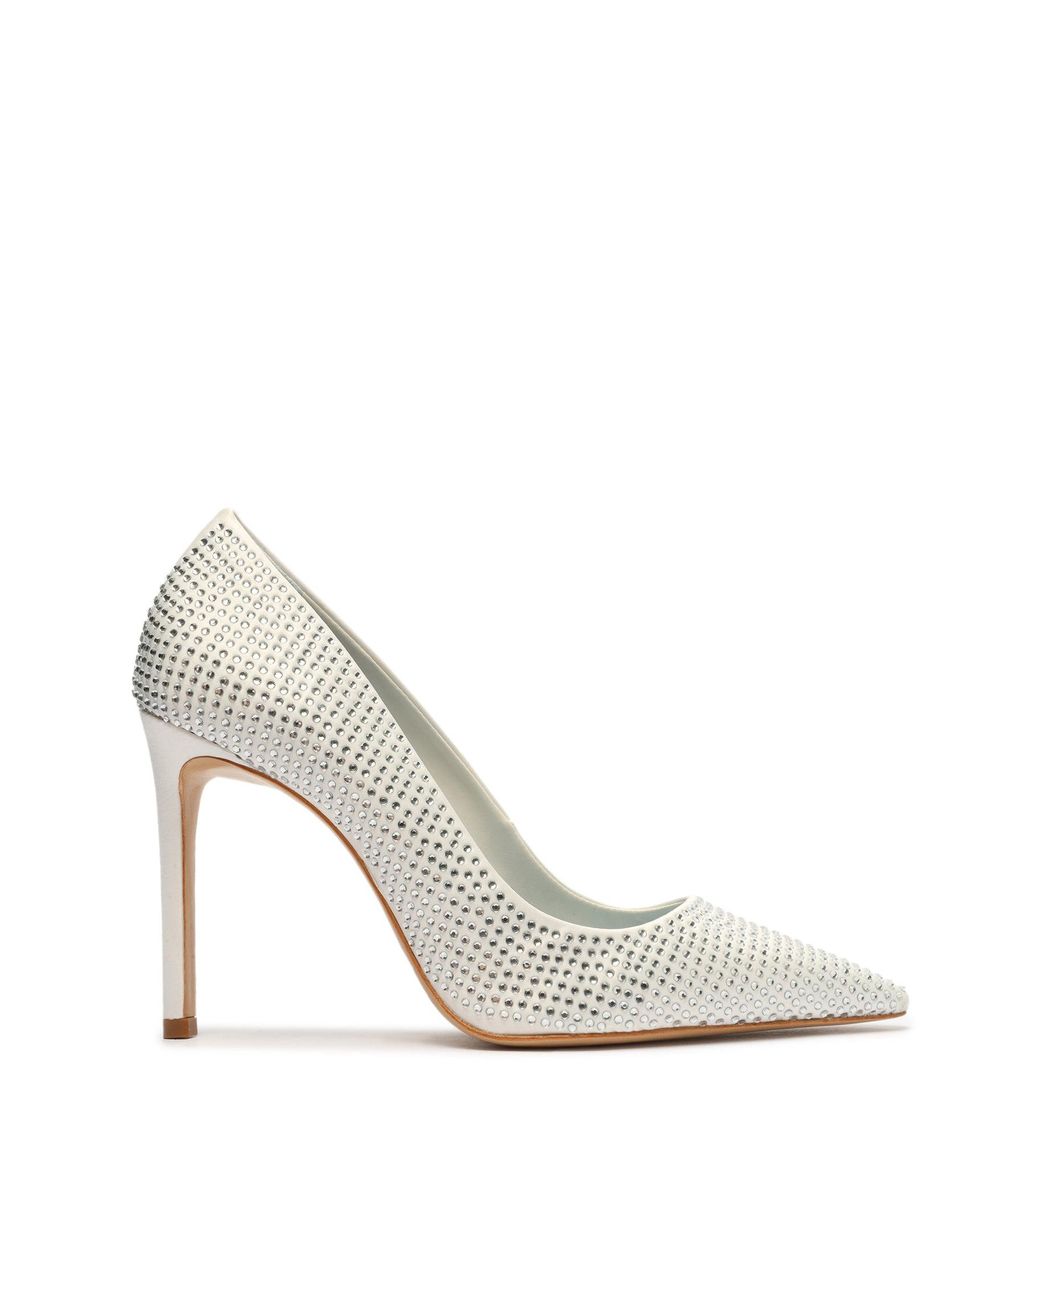 SCHUTZ SHOES Lou Crystal Satin Pump in White | Lyst